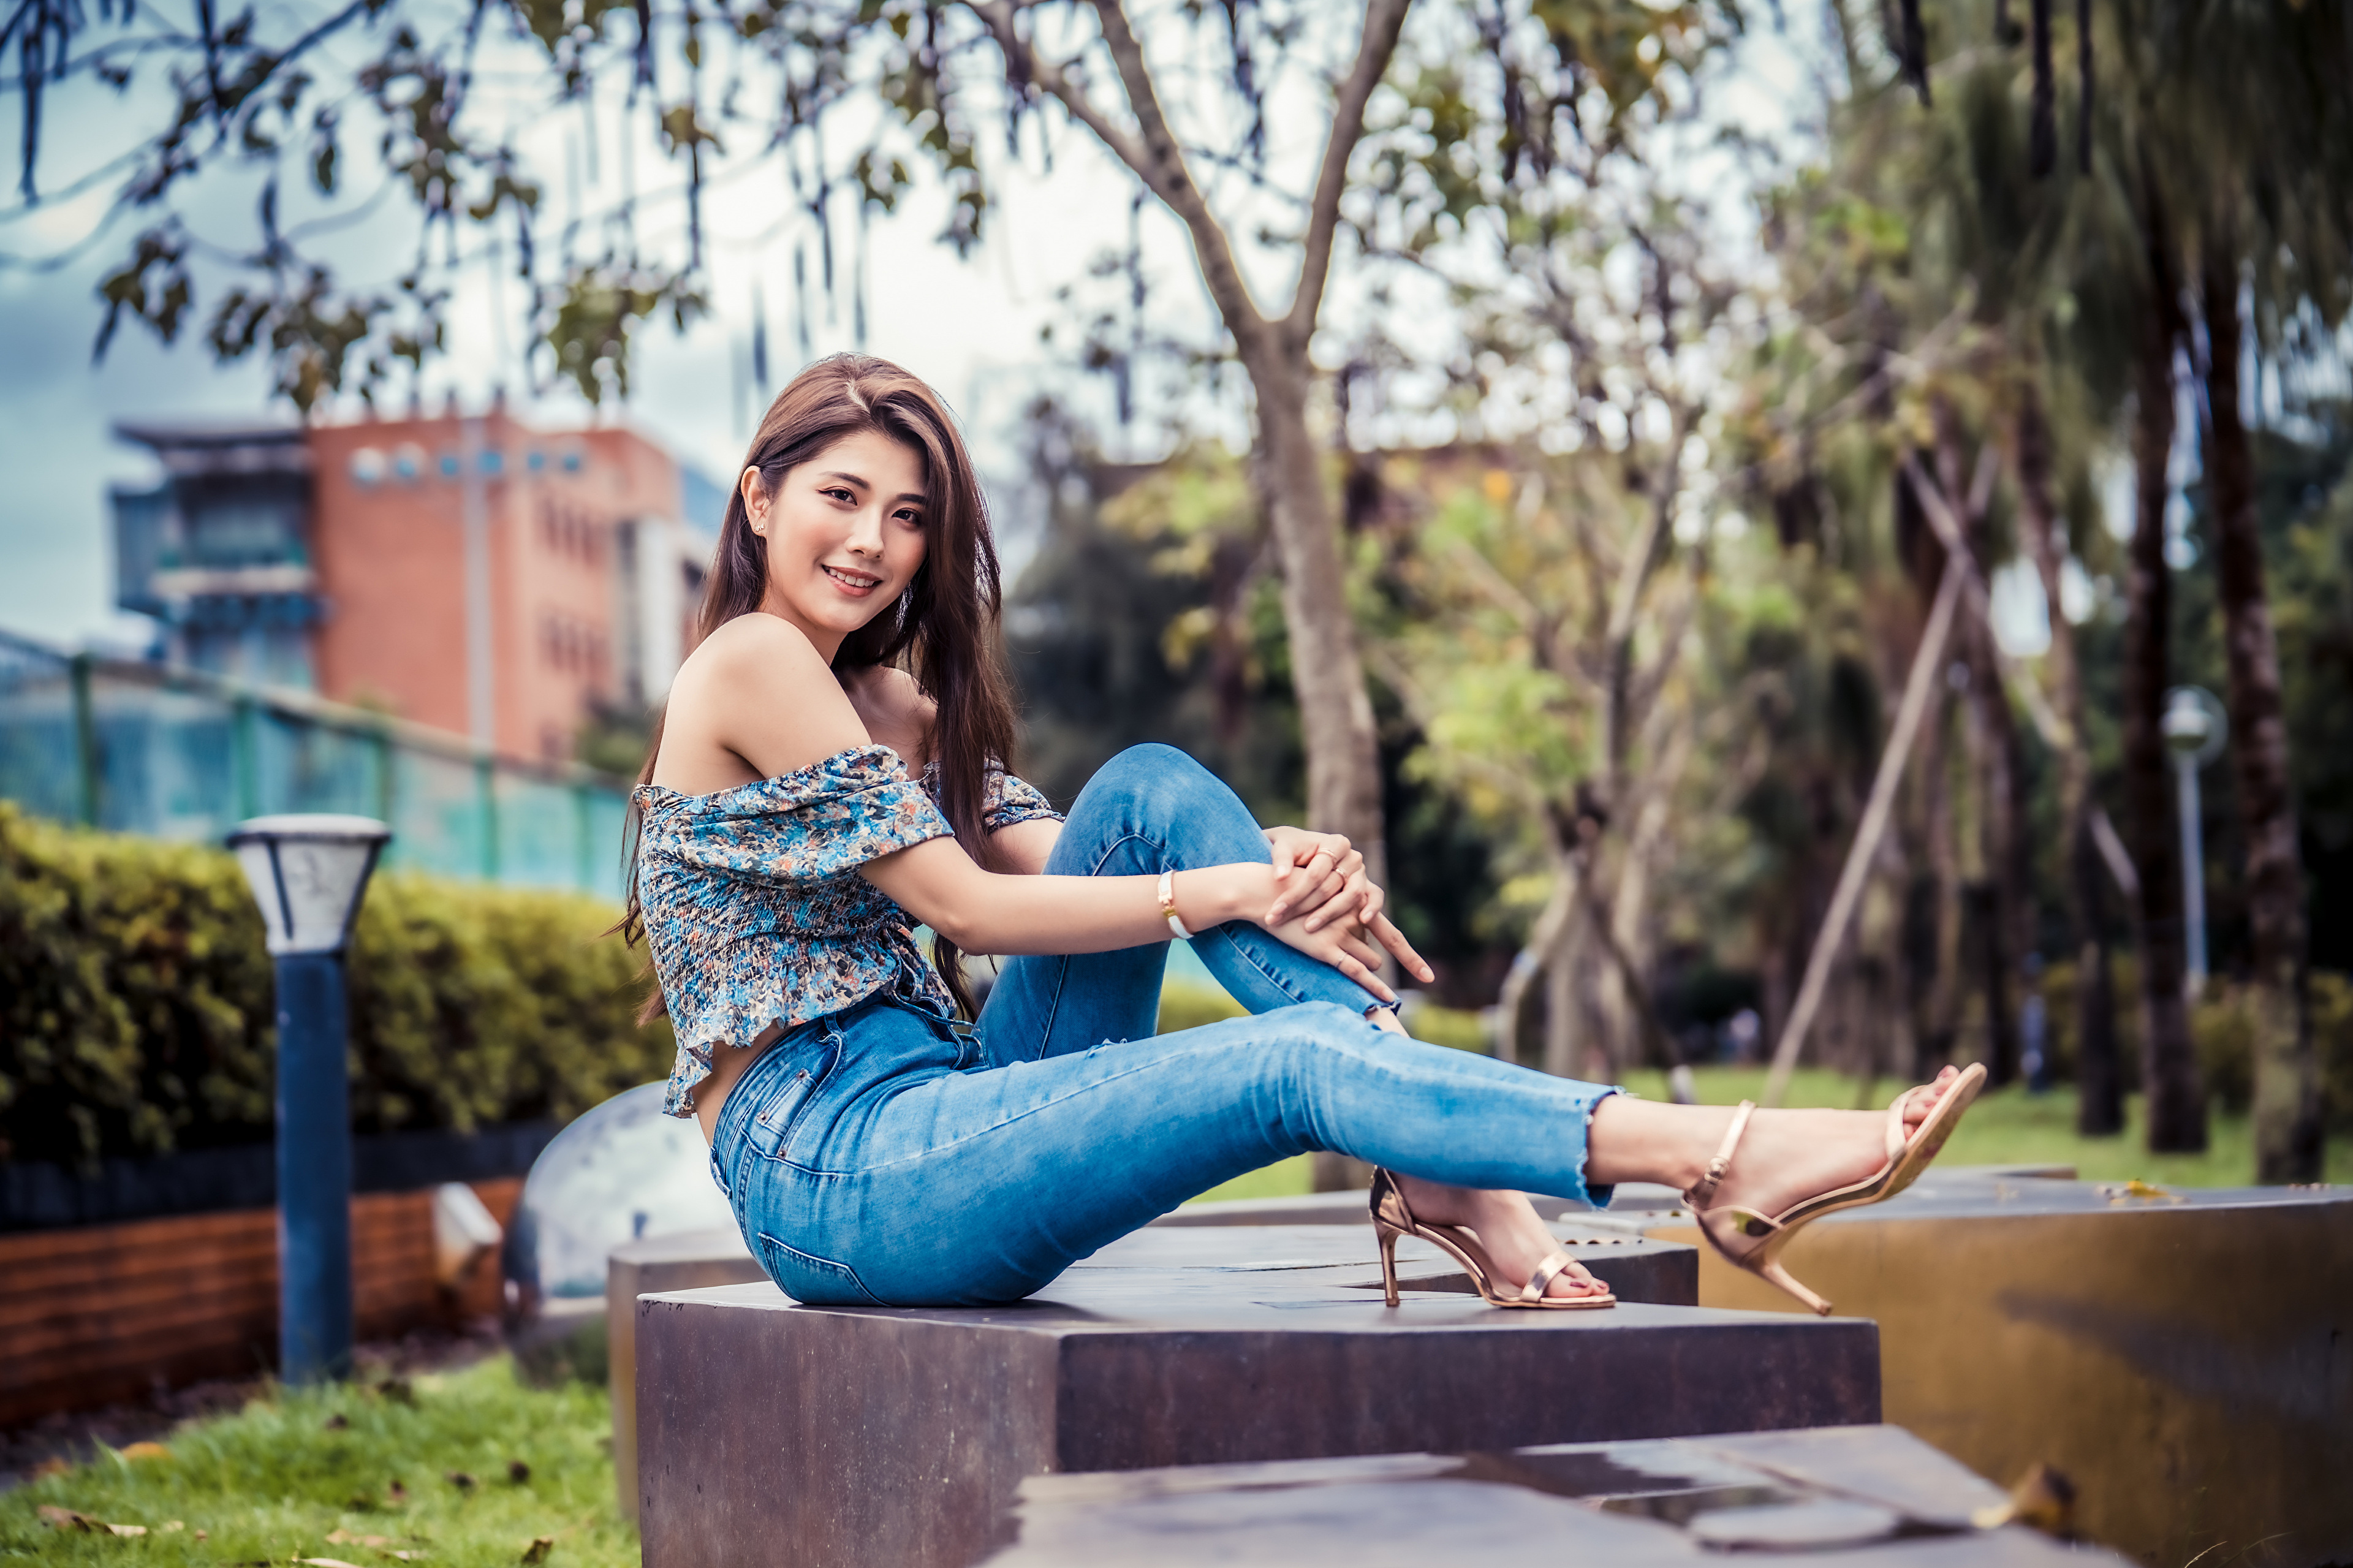 People 3840x2559 Asian model women long hair brunette depth of field sitting jeans barefoot white high heels bench trees building street light fence bushes bare shoulders blouses women outdoors heels golden heels urban outdoors looking at viewer